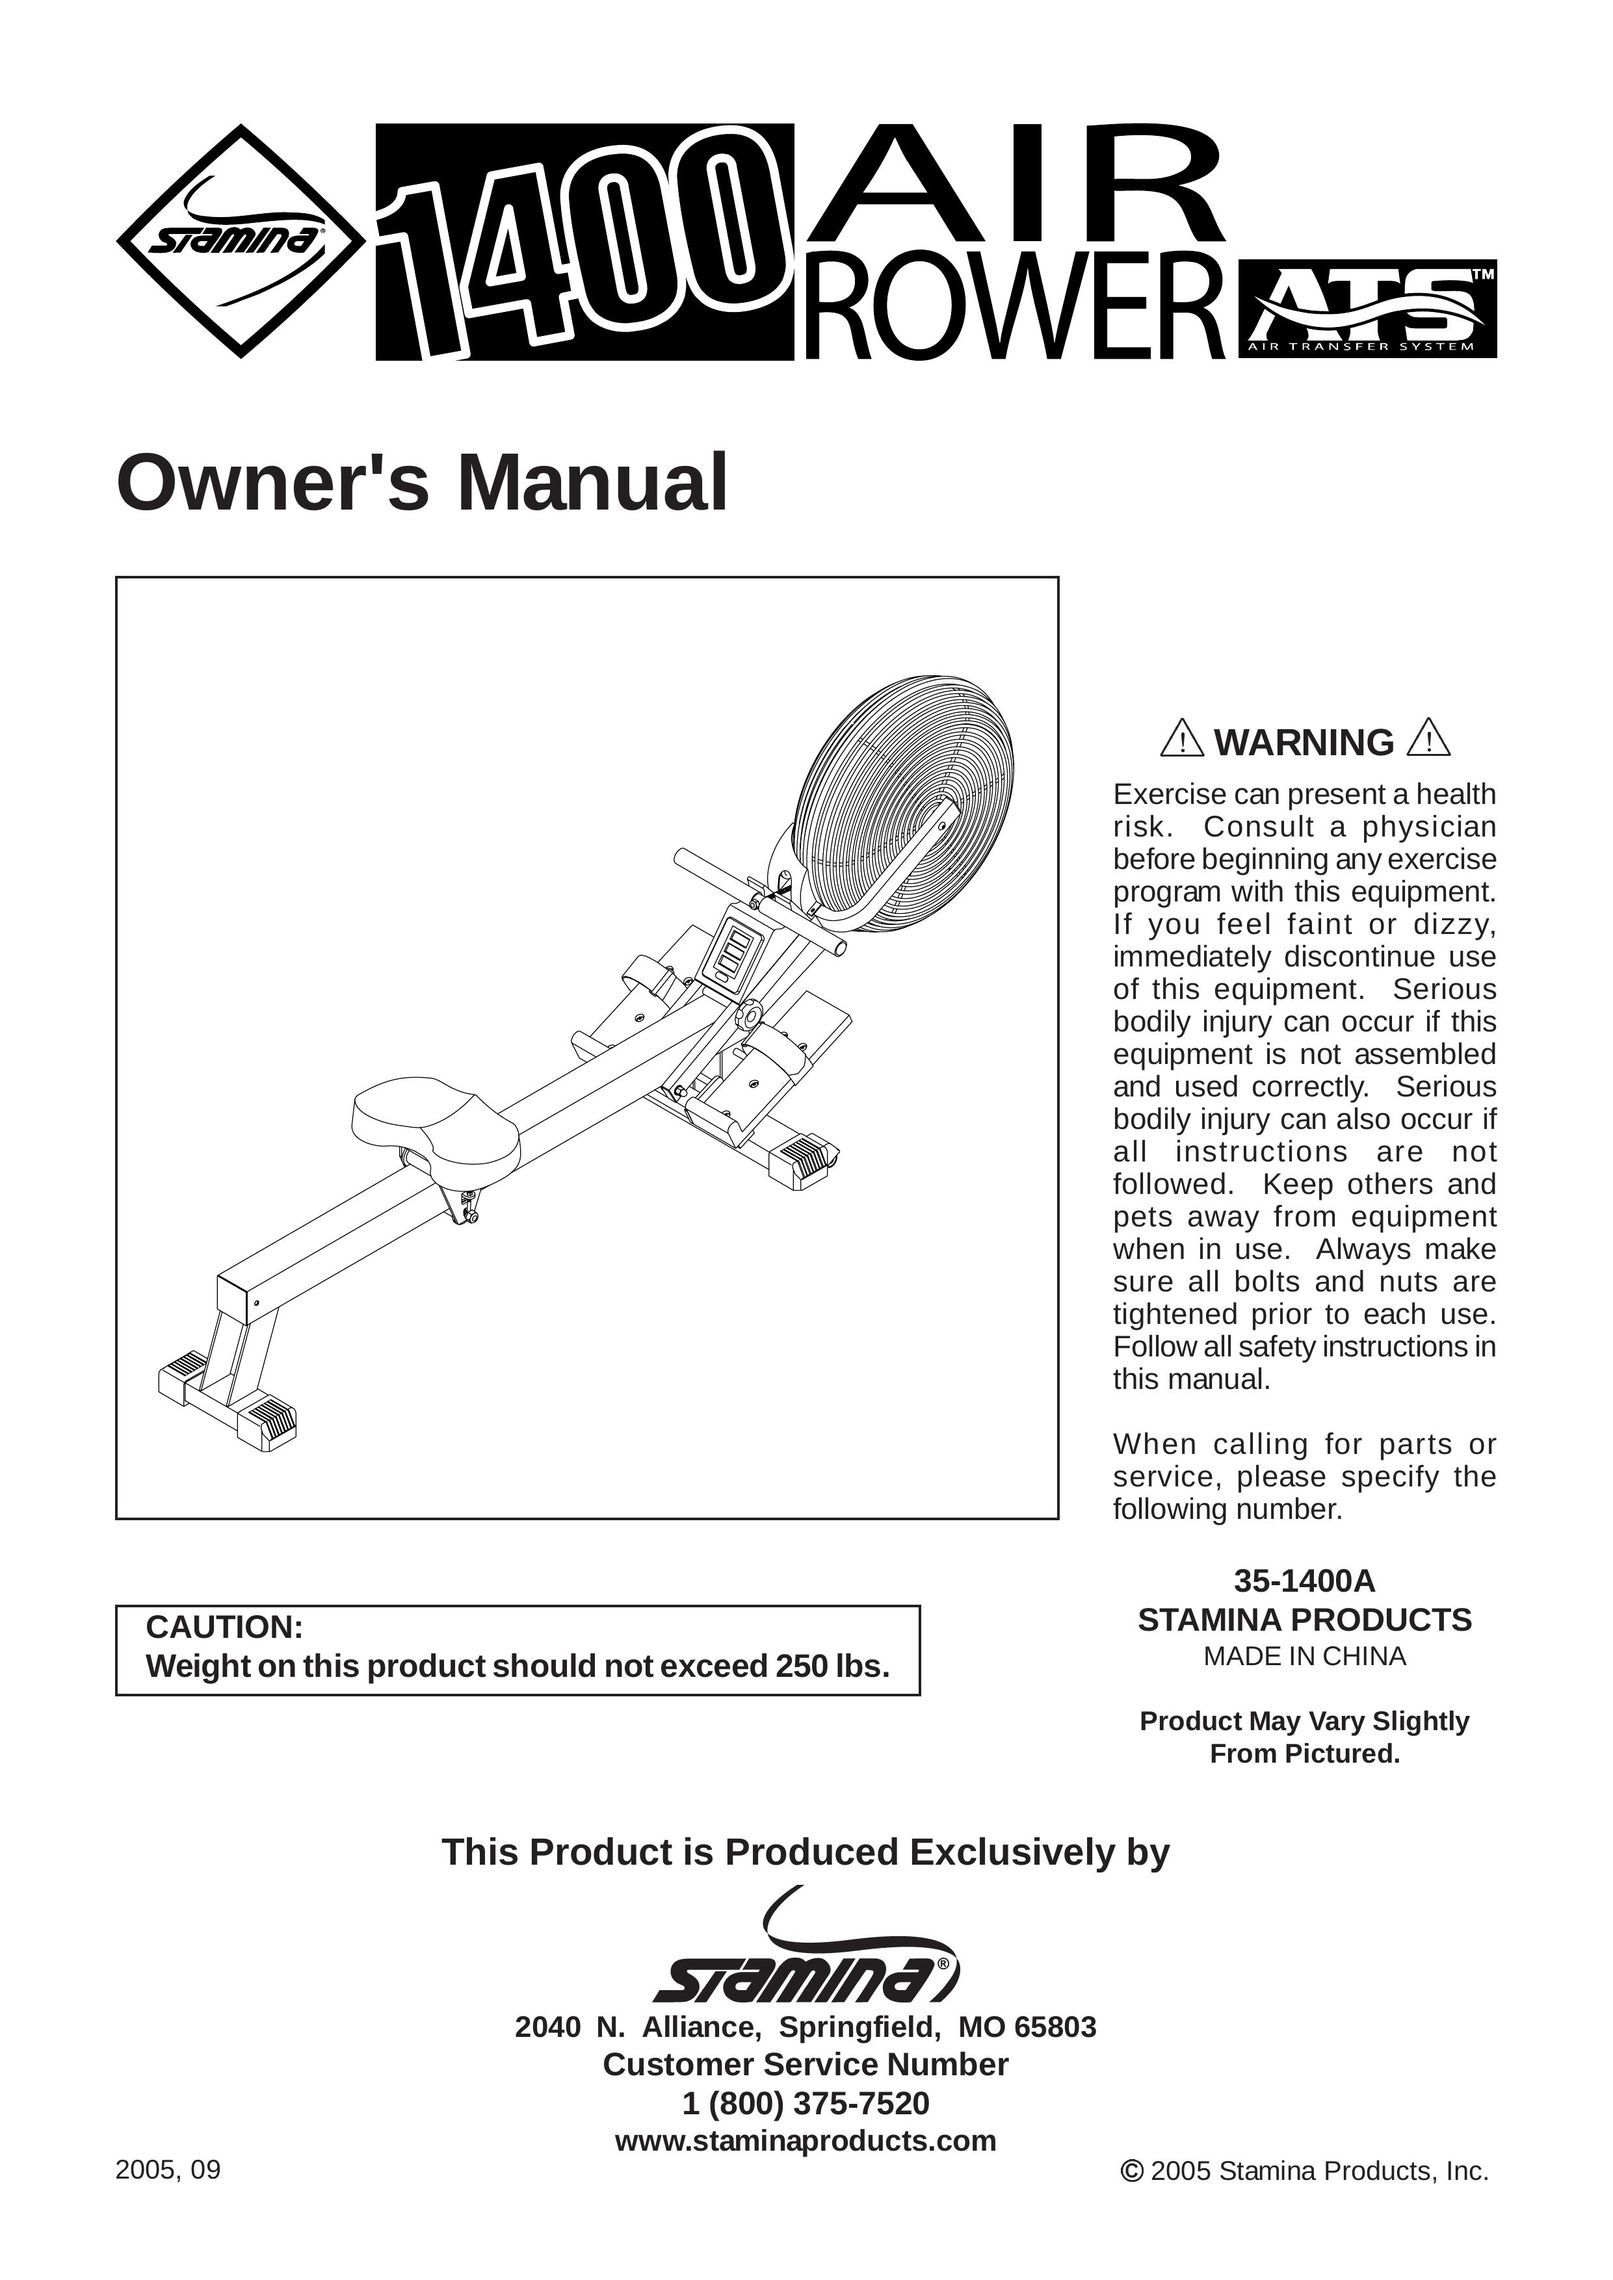 Stamina Products 35-1400A Rowing Machine User Manual